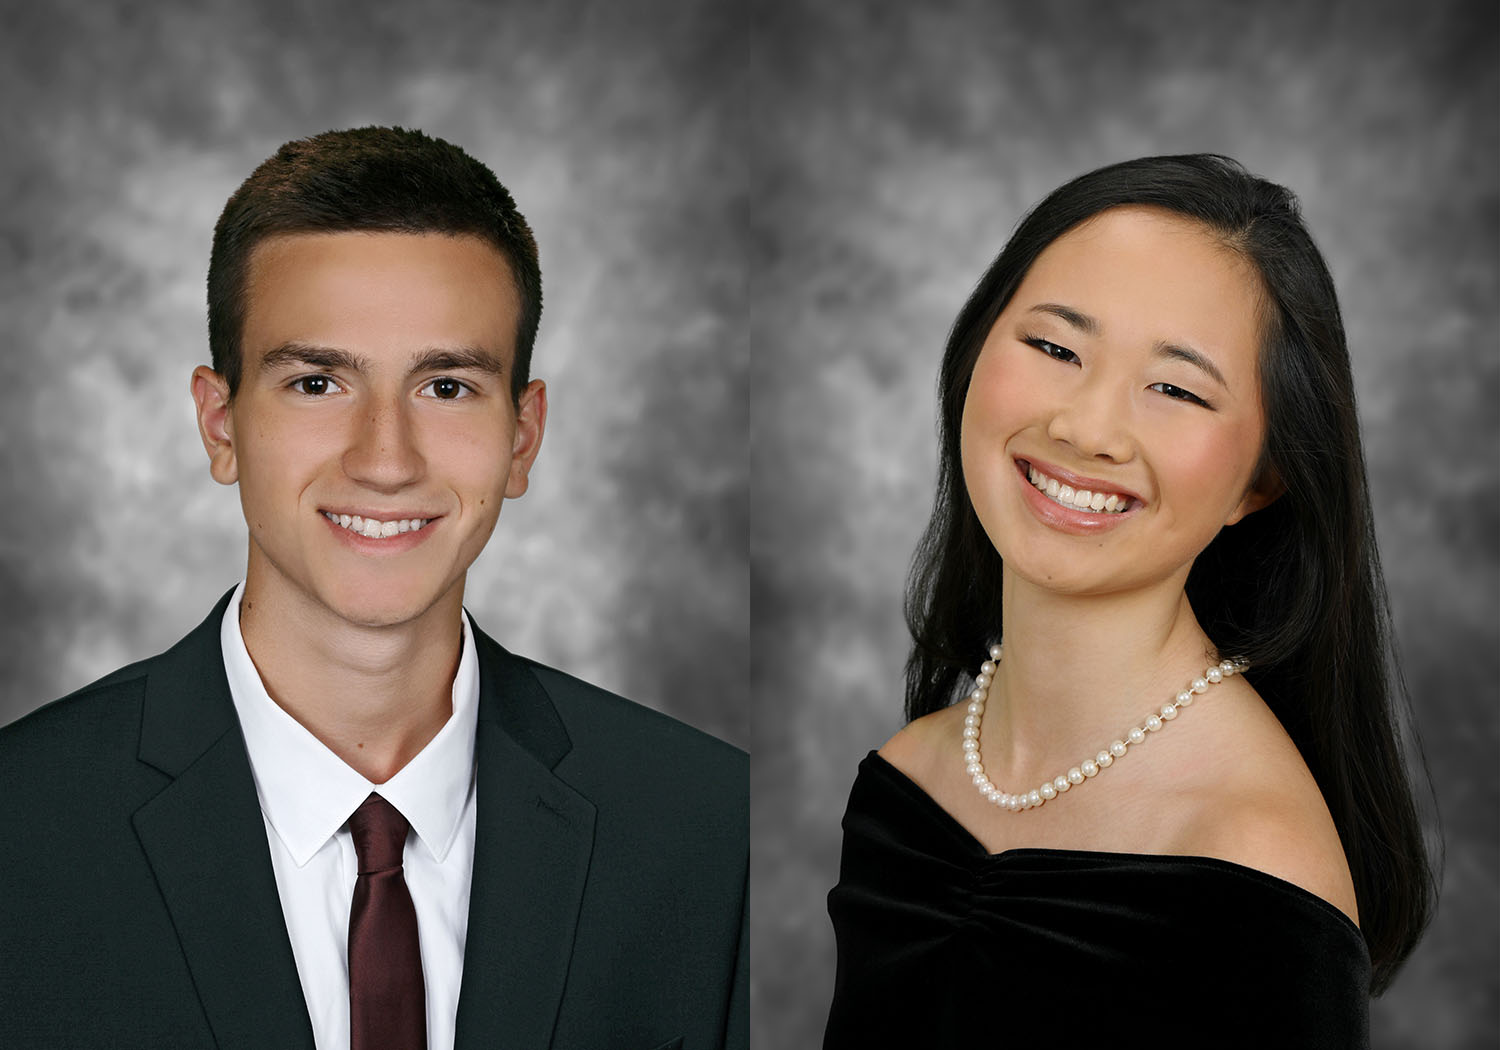 Schedule a Formal Yearbook Sitting AT THE STUDIO | F5.jpg